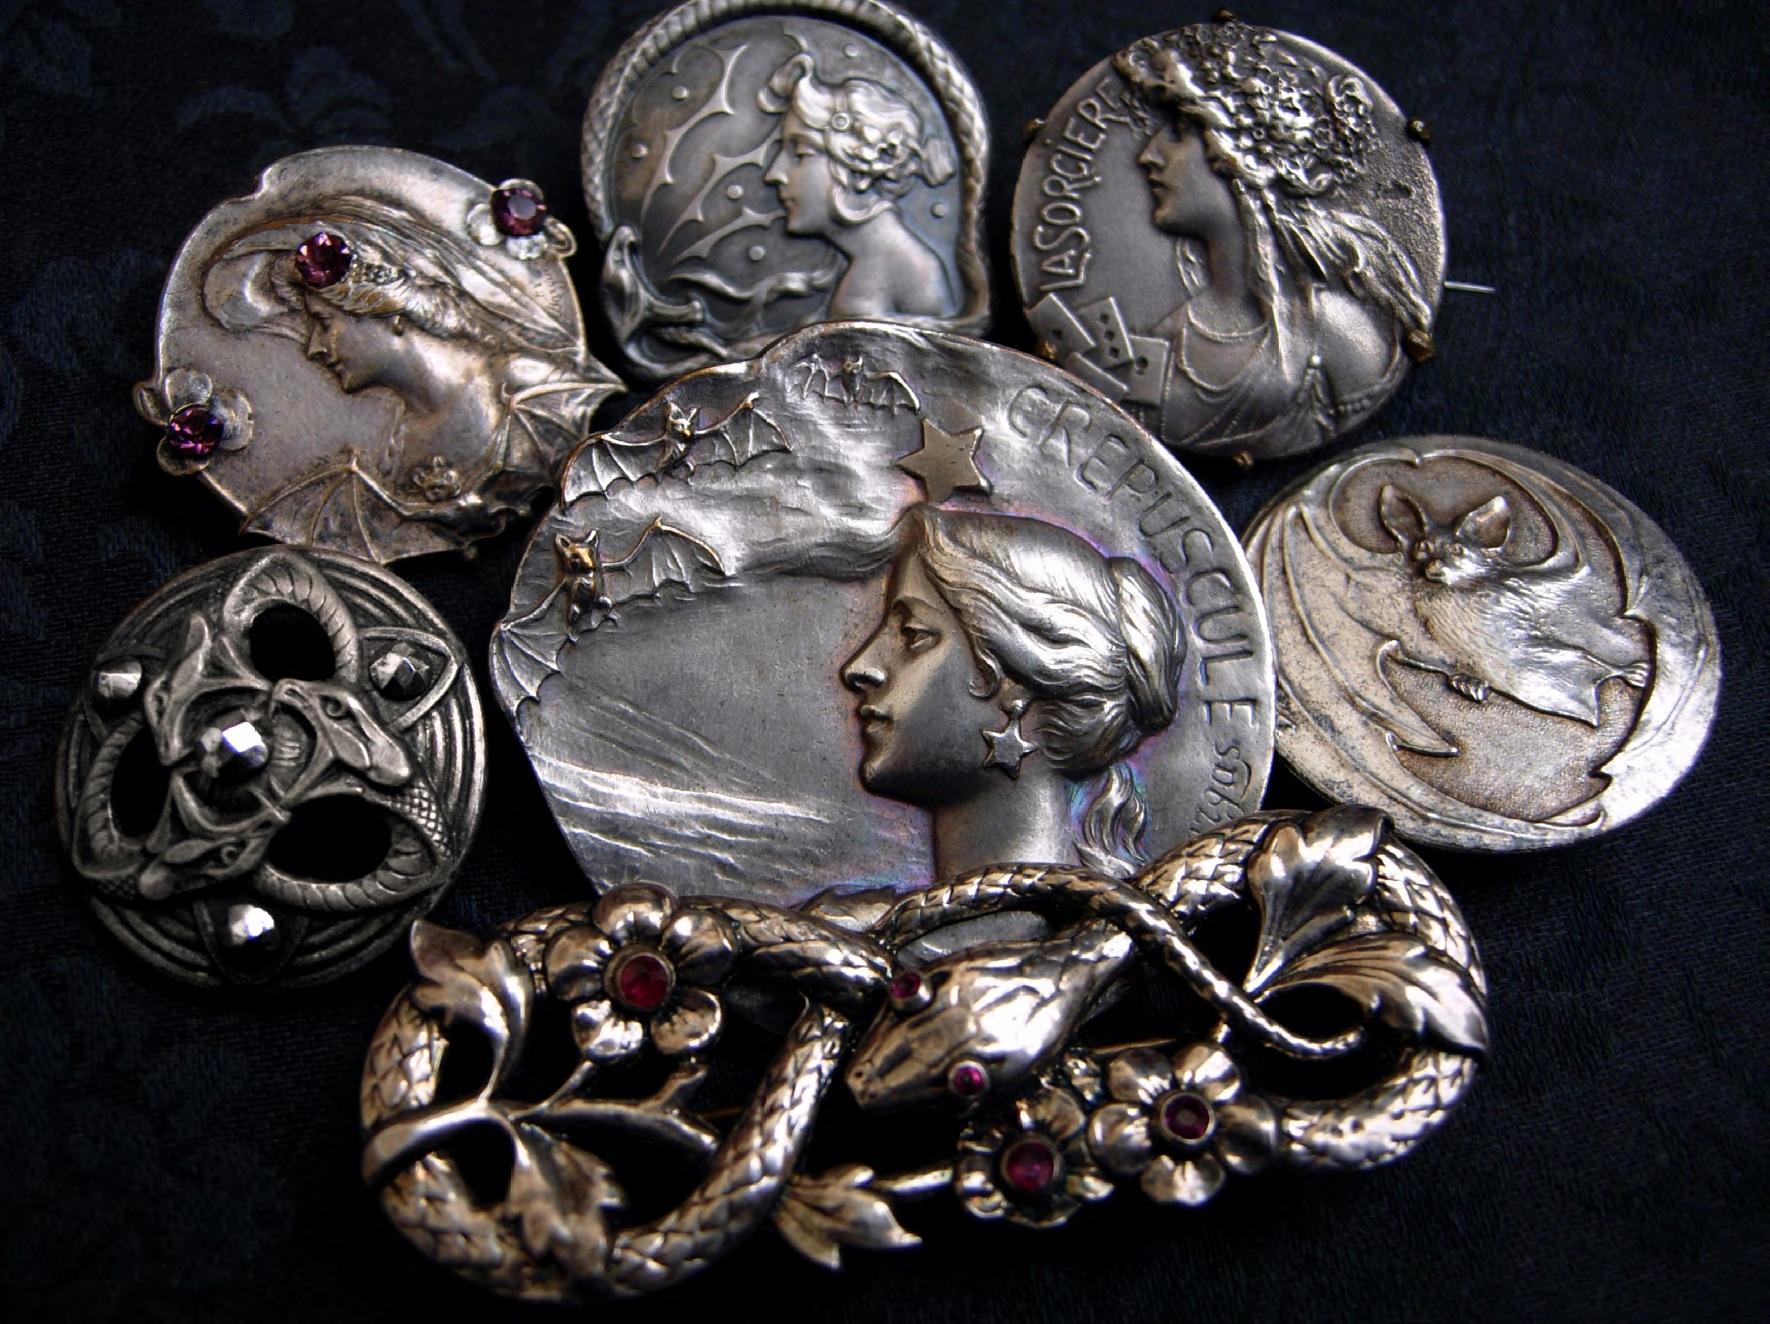 Serpents and Sorceresses—a decadent assortment of antique Art Nouveau brooches and buttons, including interlaced serpents accented with shimmering garnets and marcasite, a fluttering of bats, plus the witchy women who are perfectly content to share their time with either (and perhaps be convinced to tell your fortune while doing so).